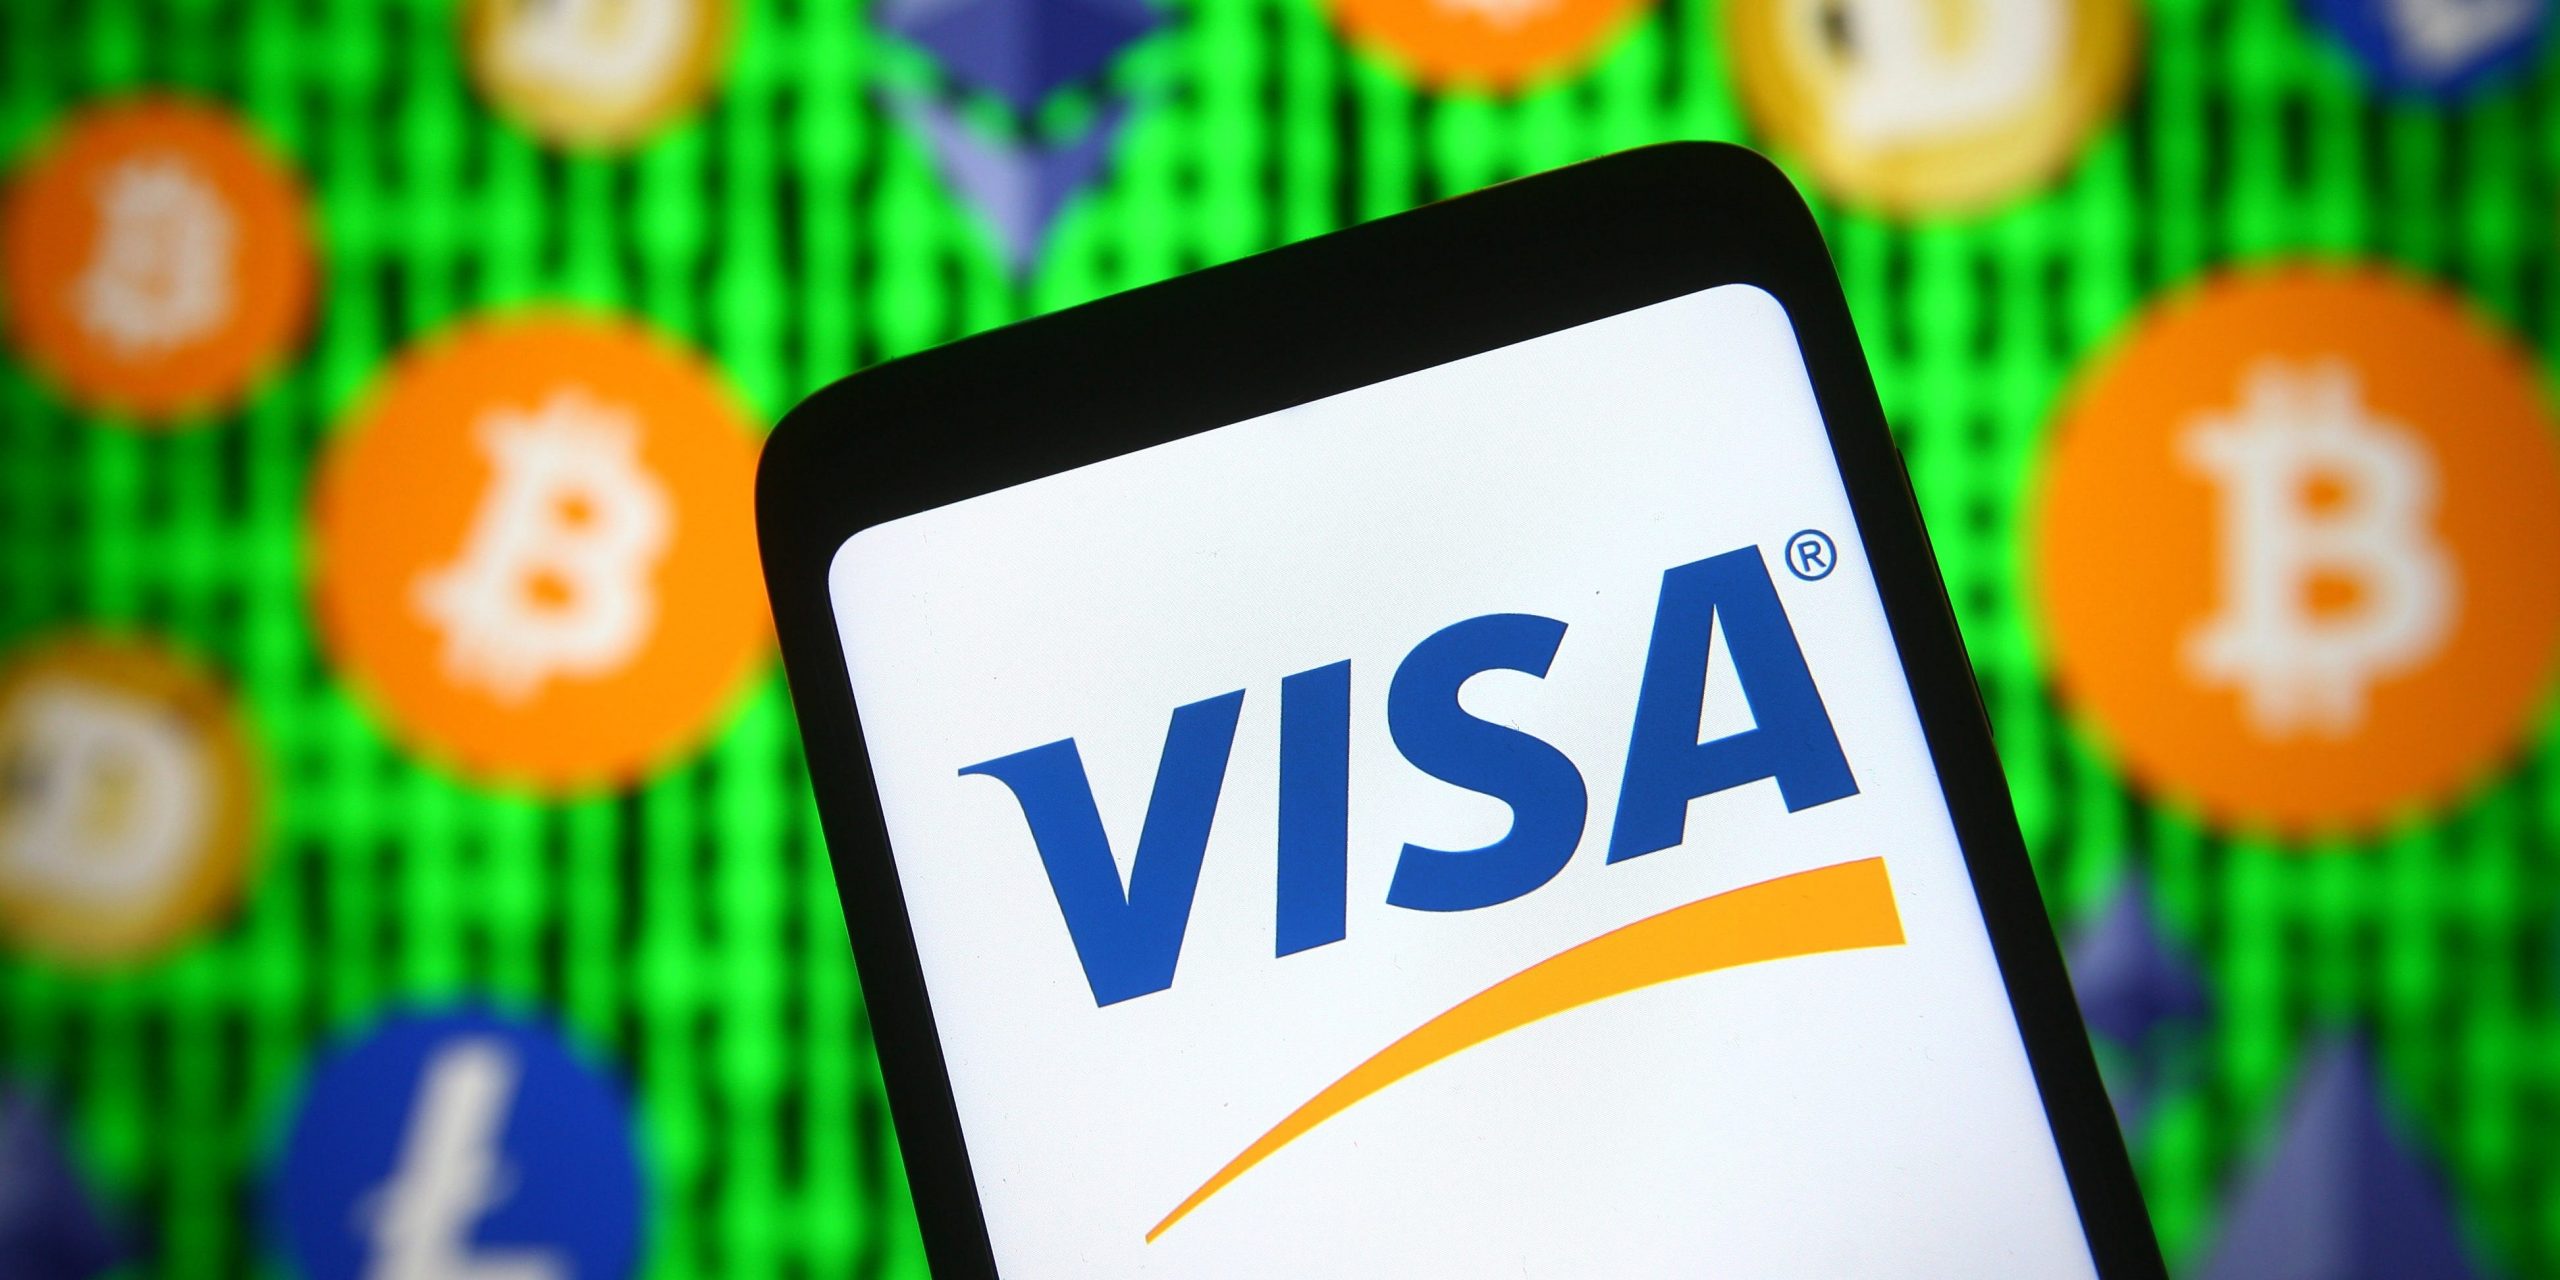 In this photo illustration, Visa logo is seen displayed on a smartphone screen in front of cryptocurrency signs.